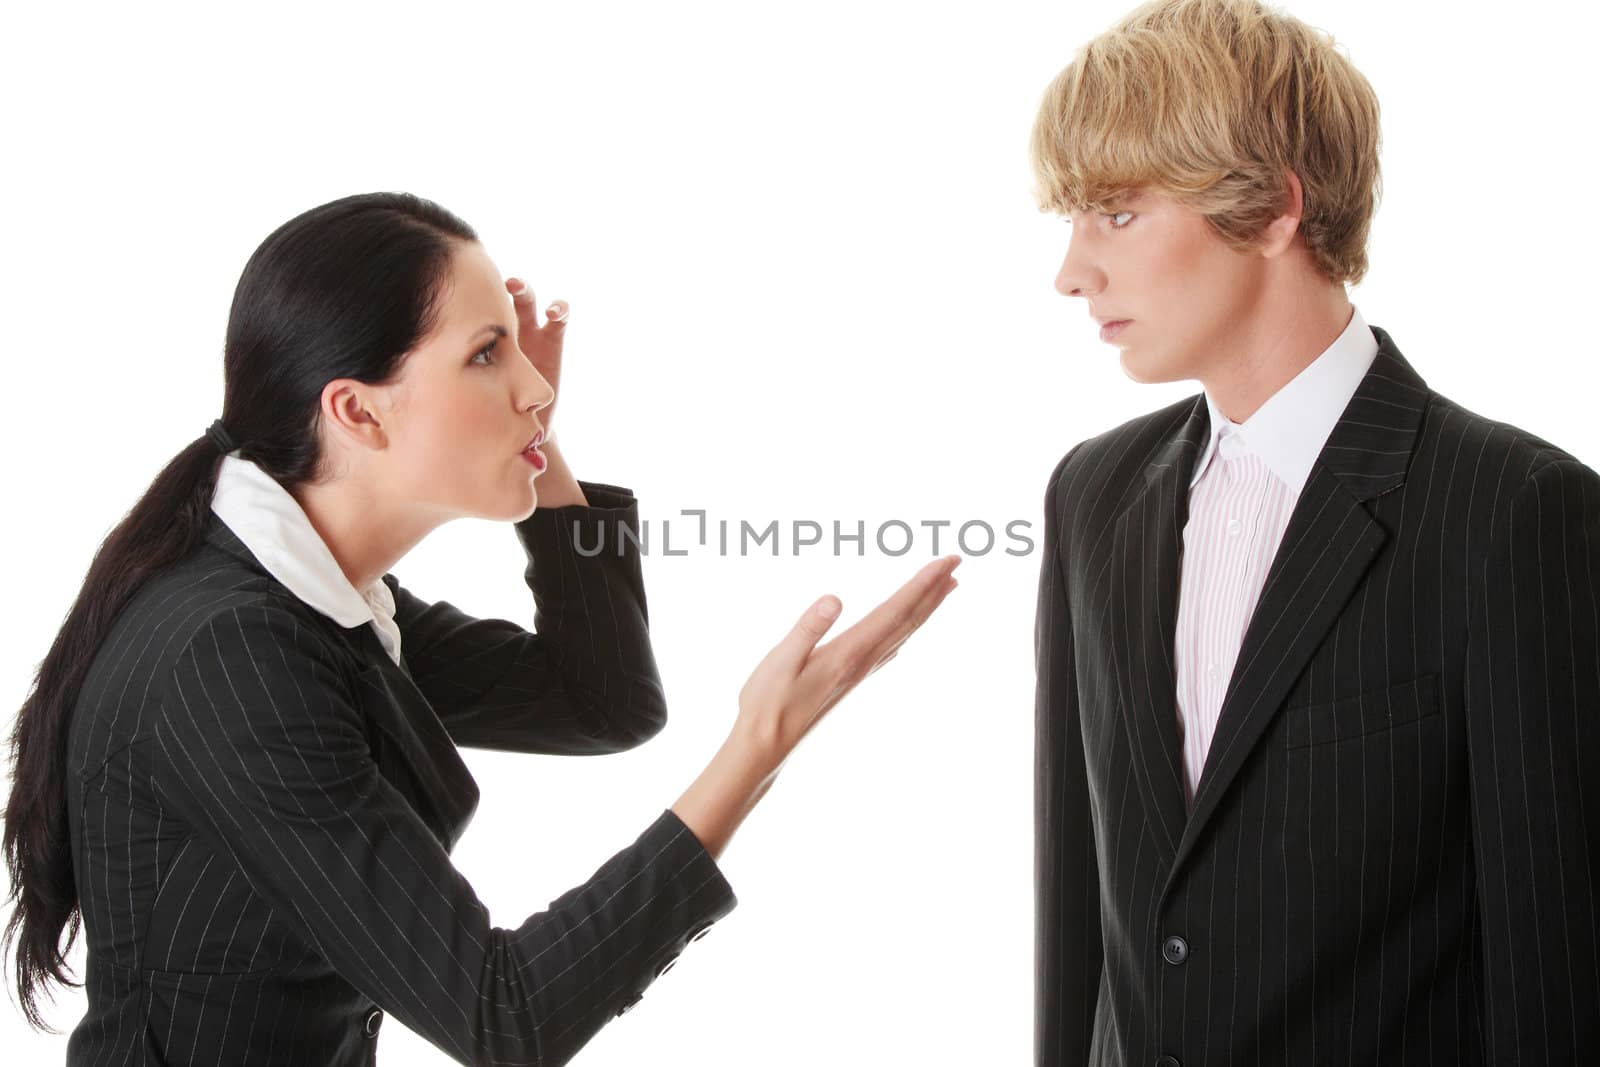 Work Colleagues arguing (woman shouting on man), isolated on white background